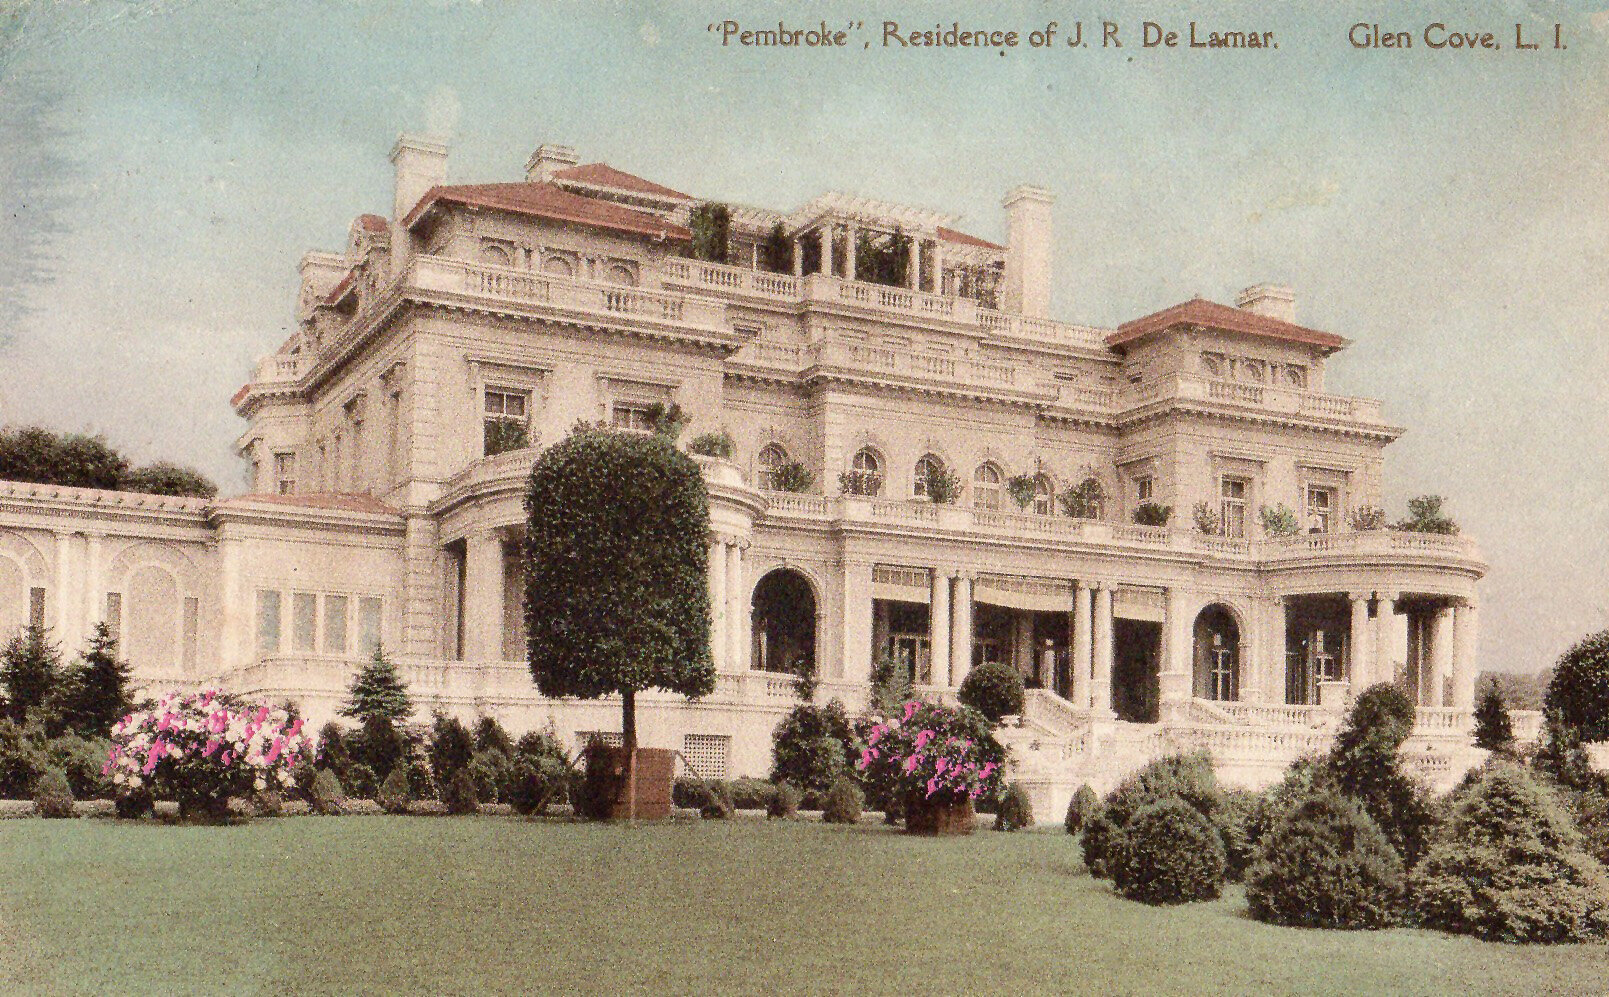 Gatsbys Mansion And Others Of The Great Gatsby Era — Lawrance Architectural Presentations